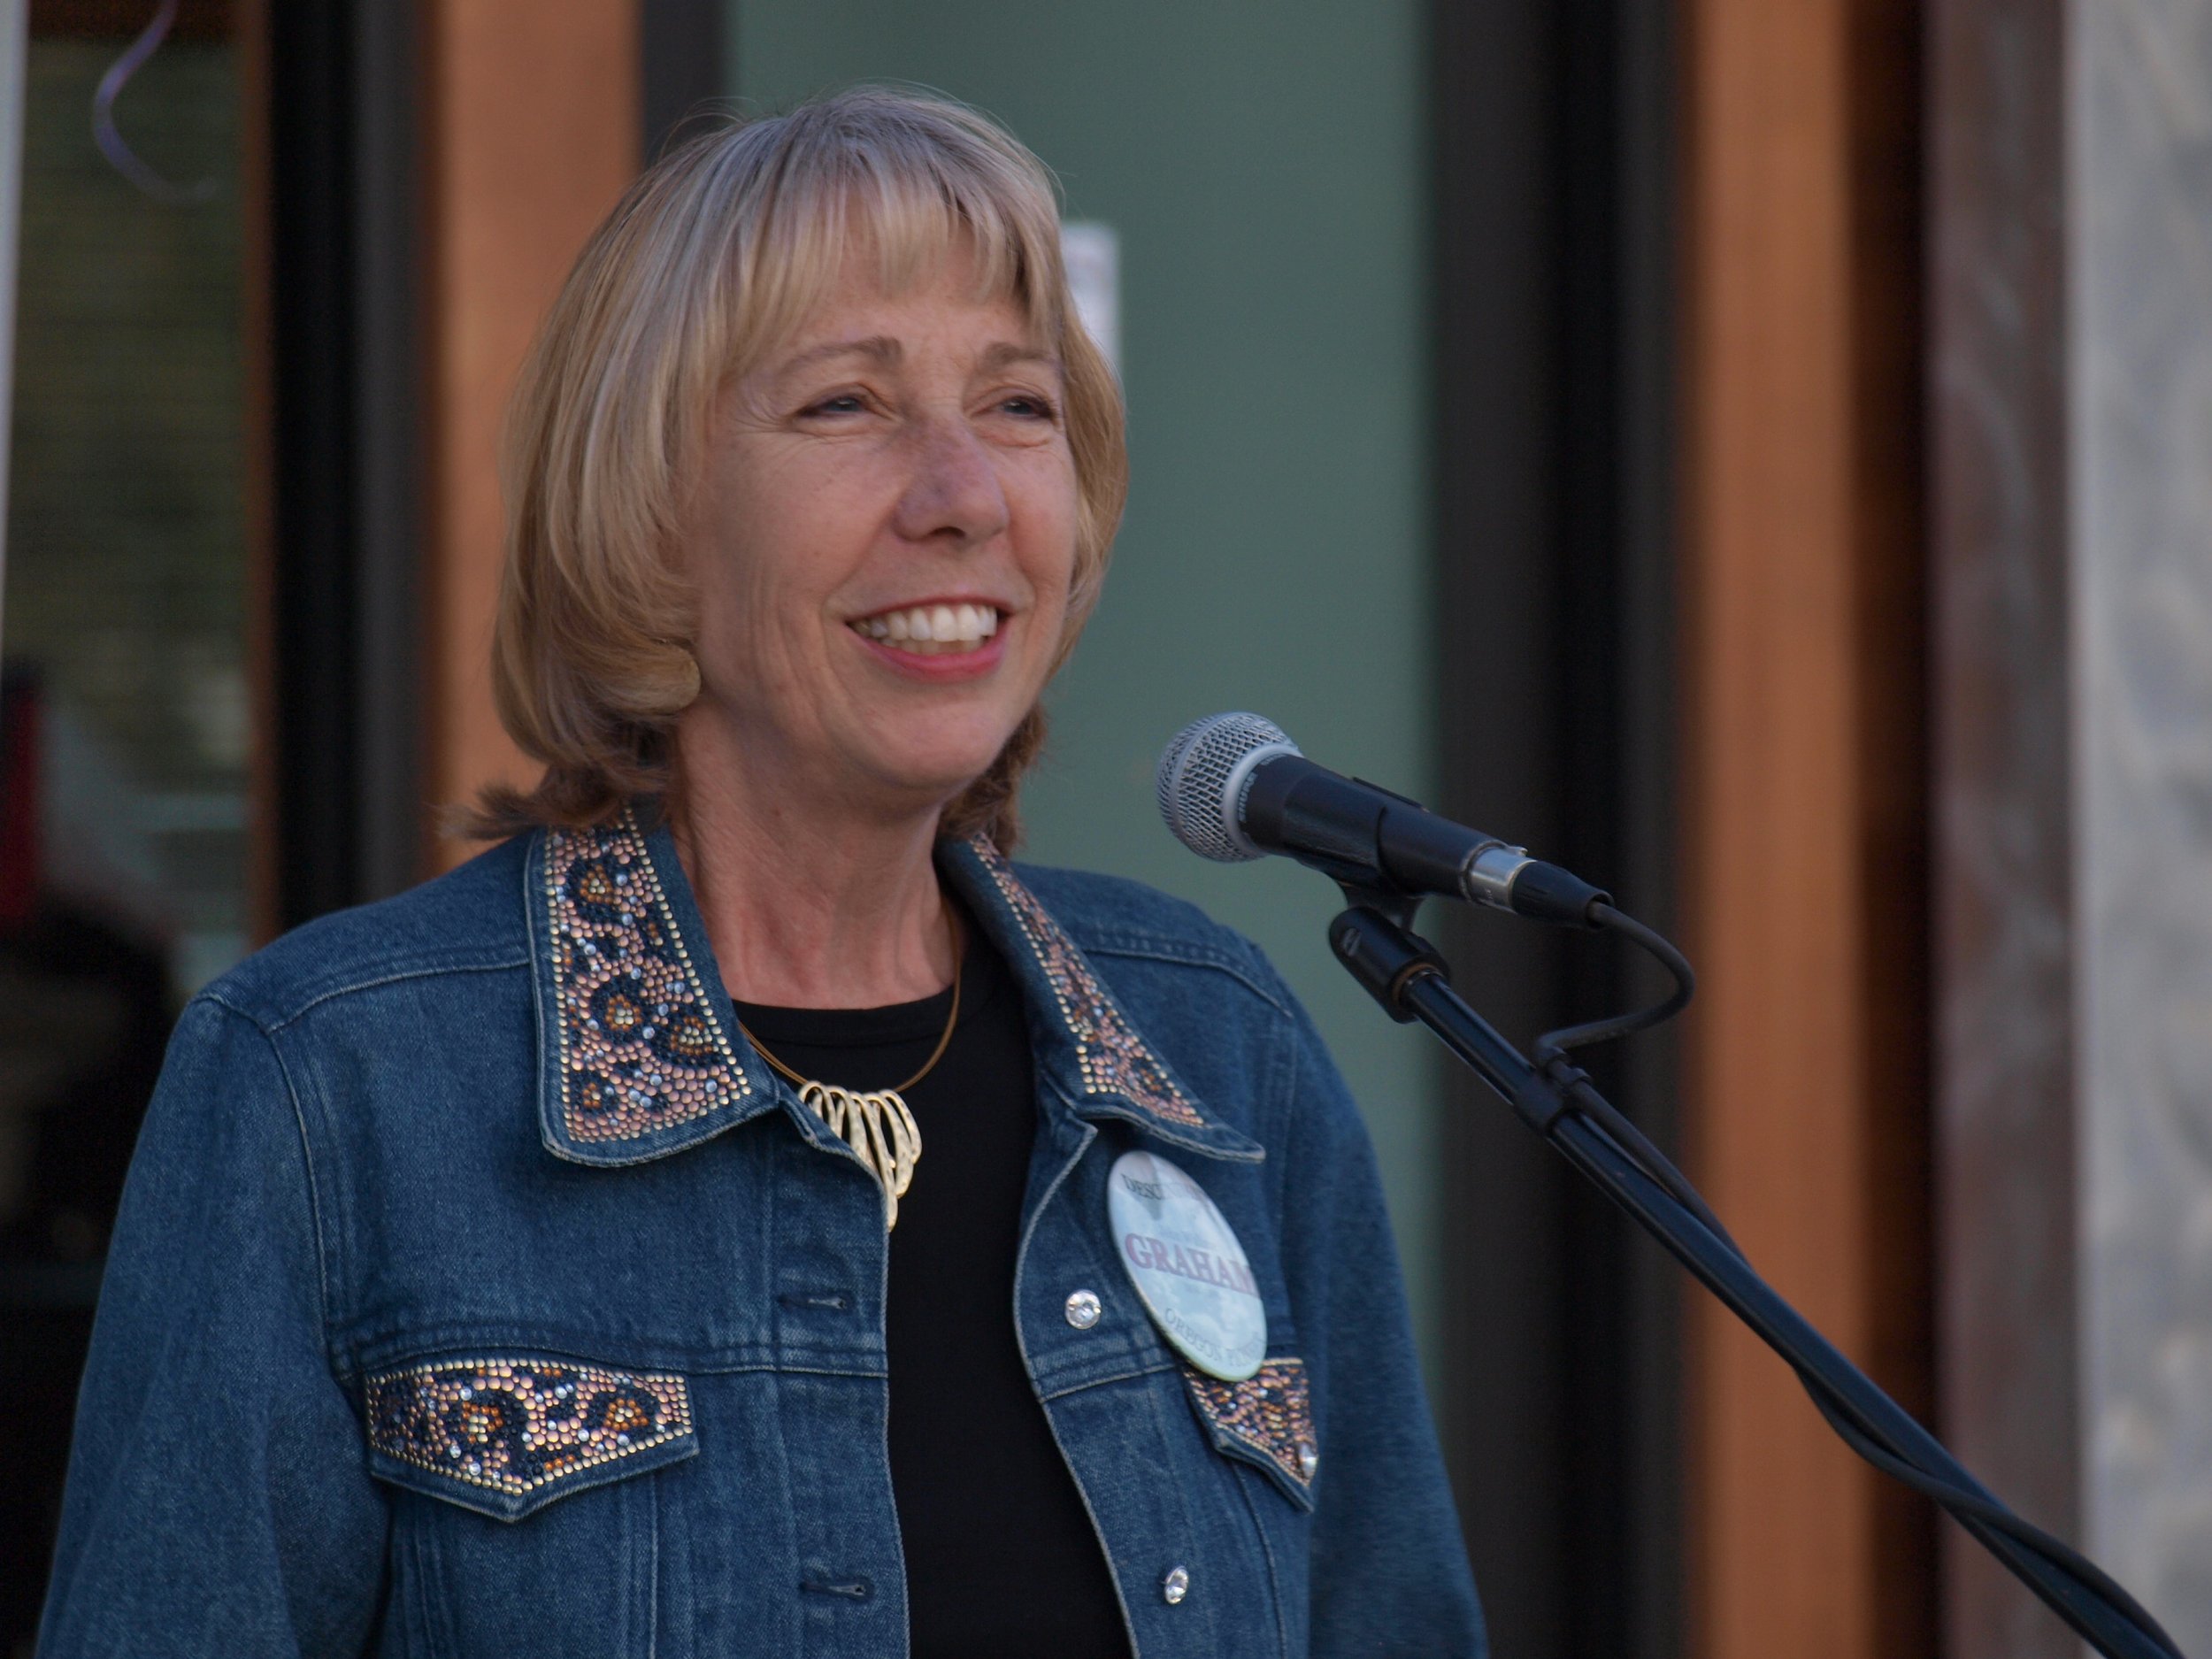 Charlotte Lehan, in 2010, at the ceremonial opening of the Transit Center’s Clock Tower